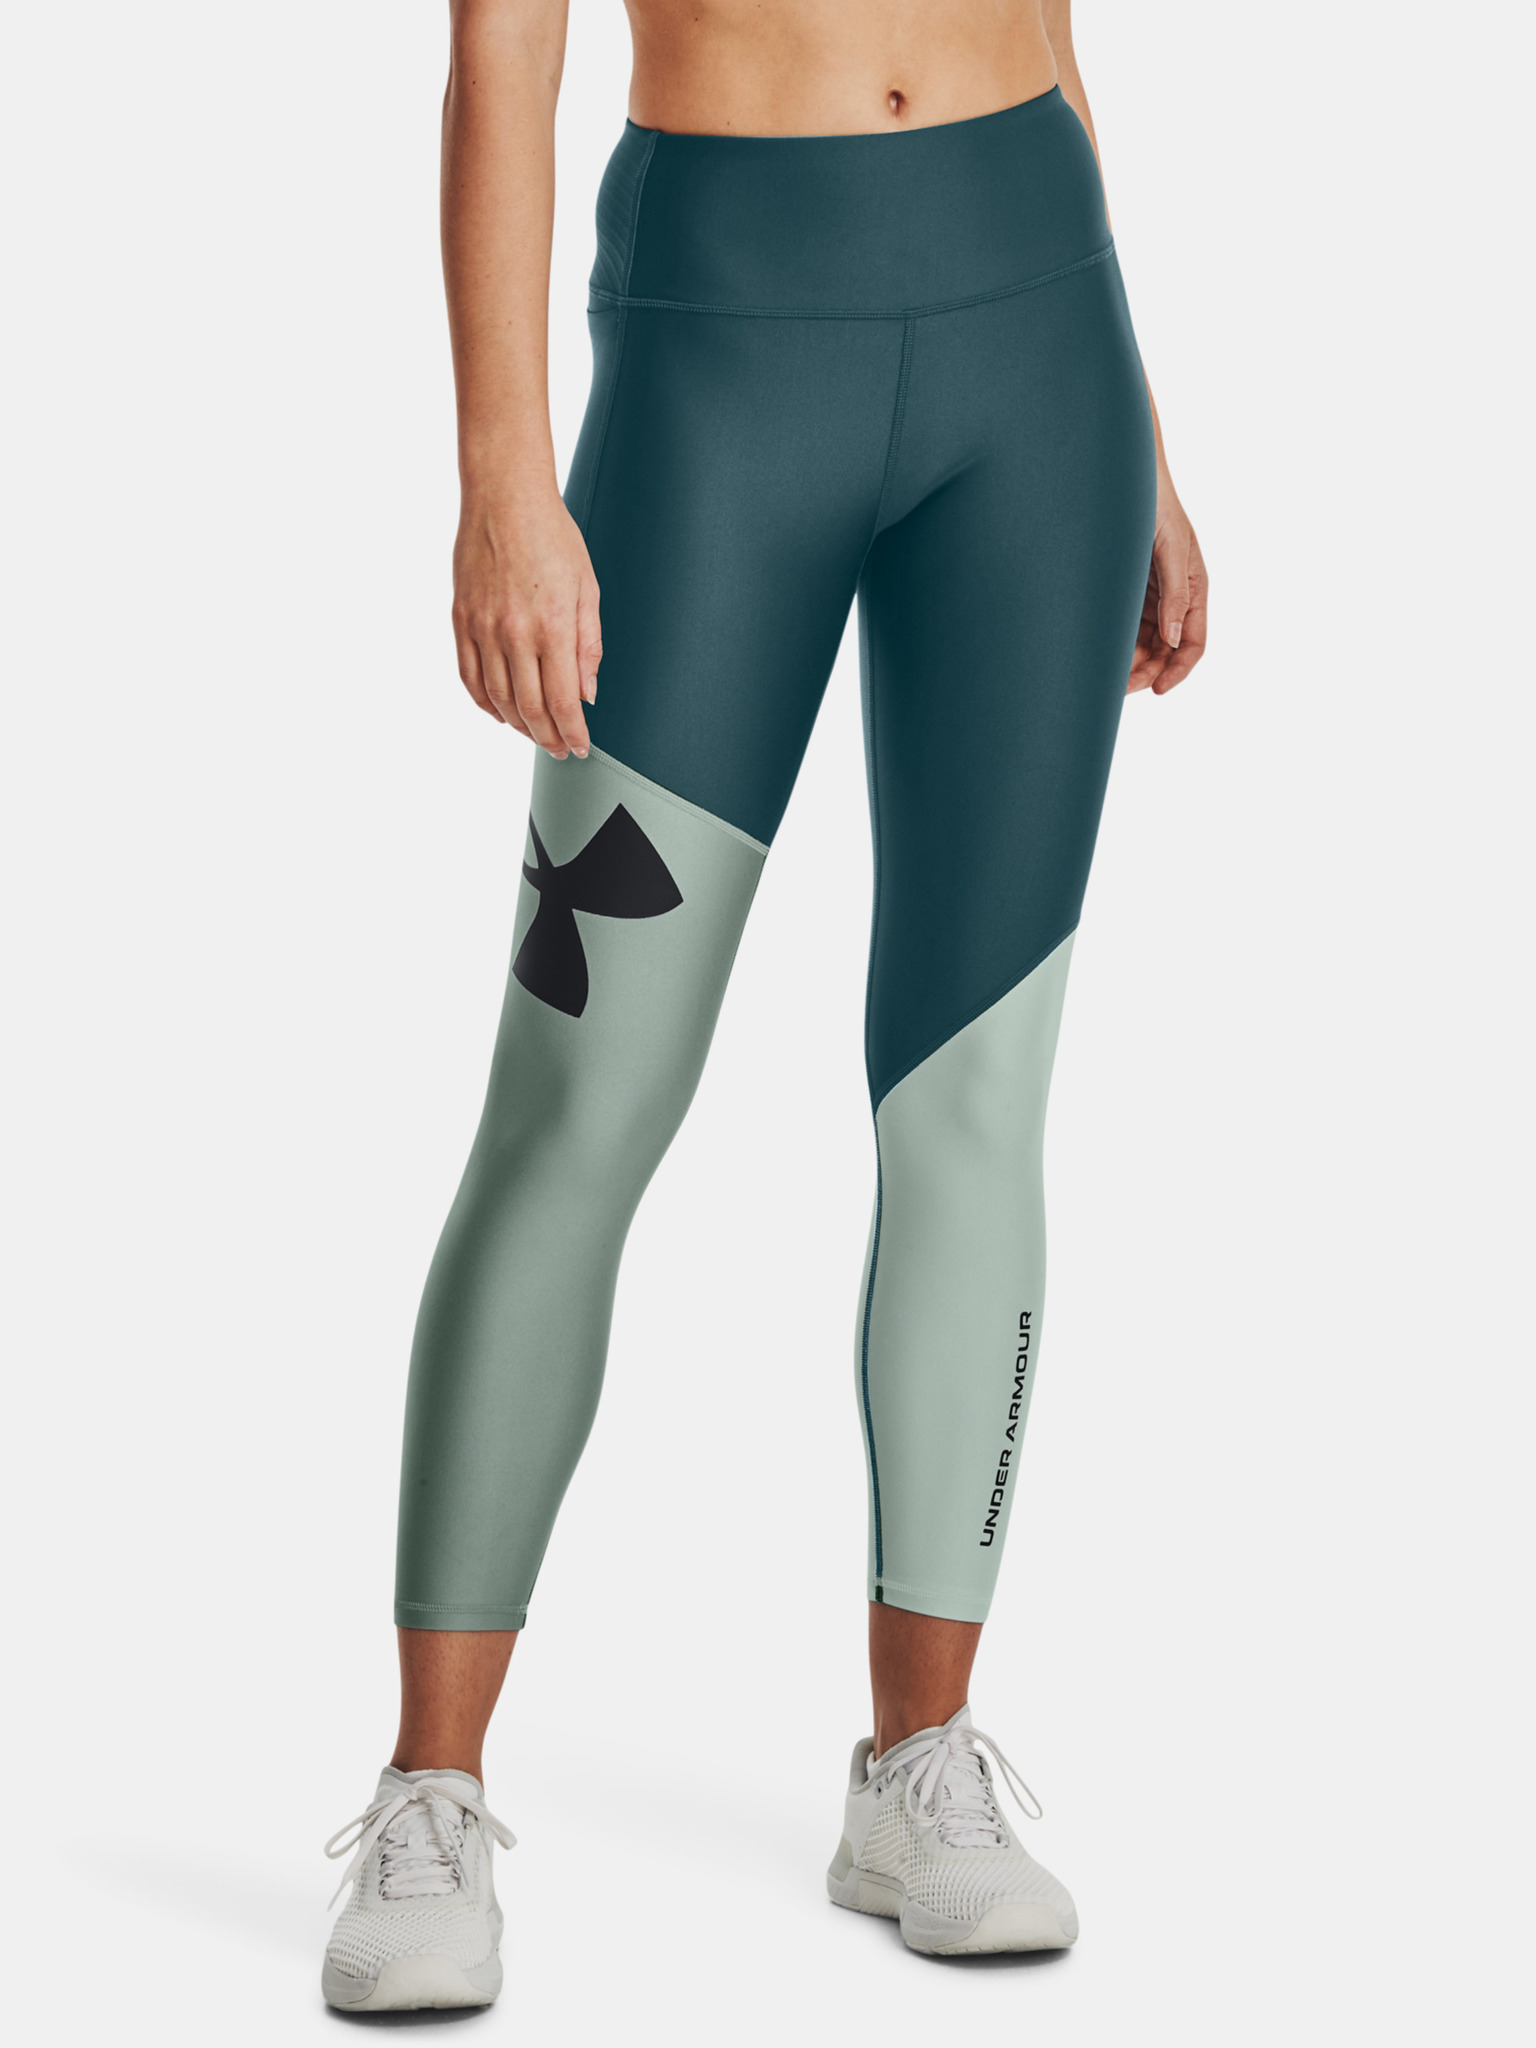 UNDER ARMOUR Women's Armour Ankle Compression Leggings NWT Silica Green  MEDIUM